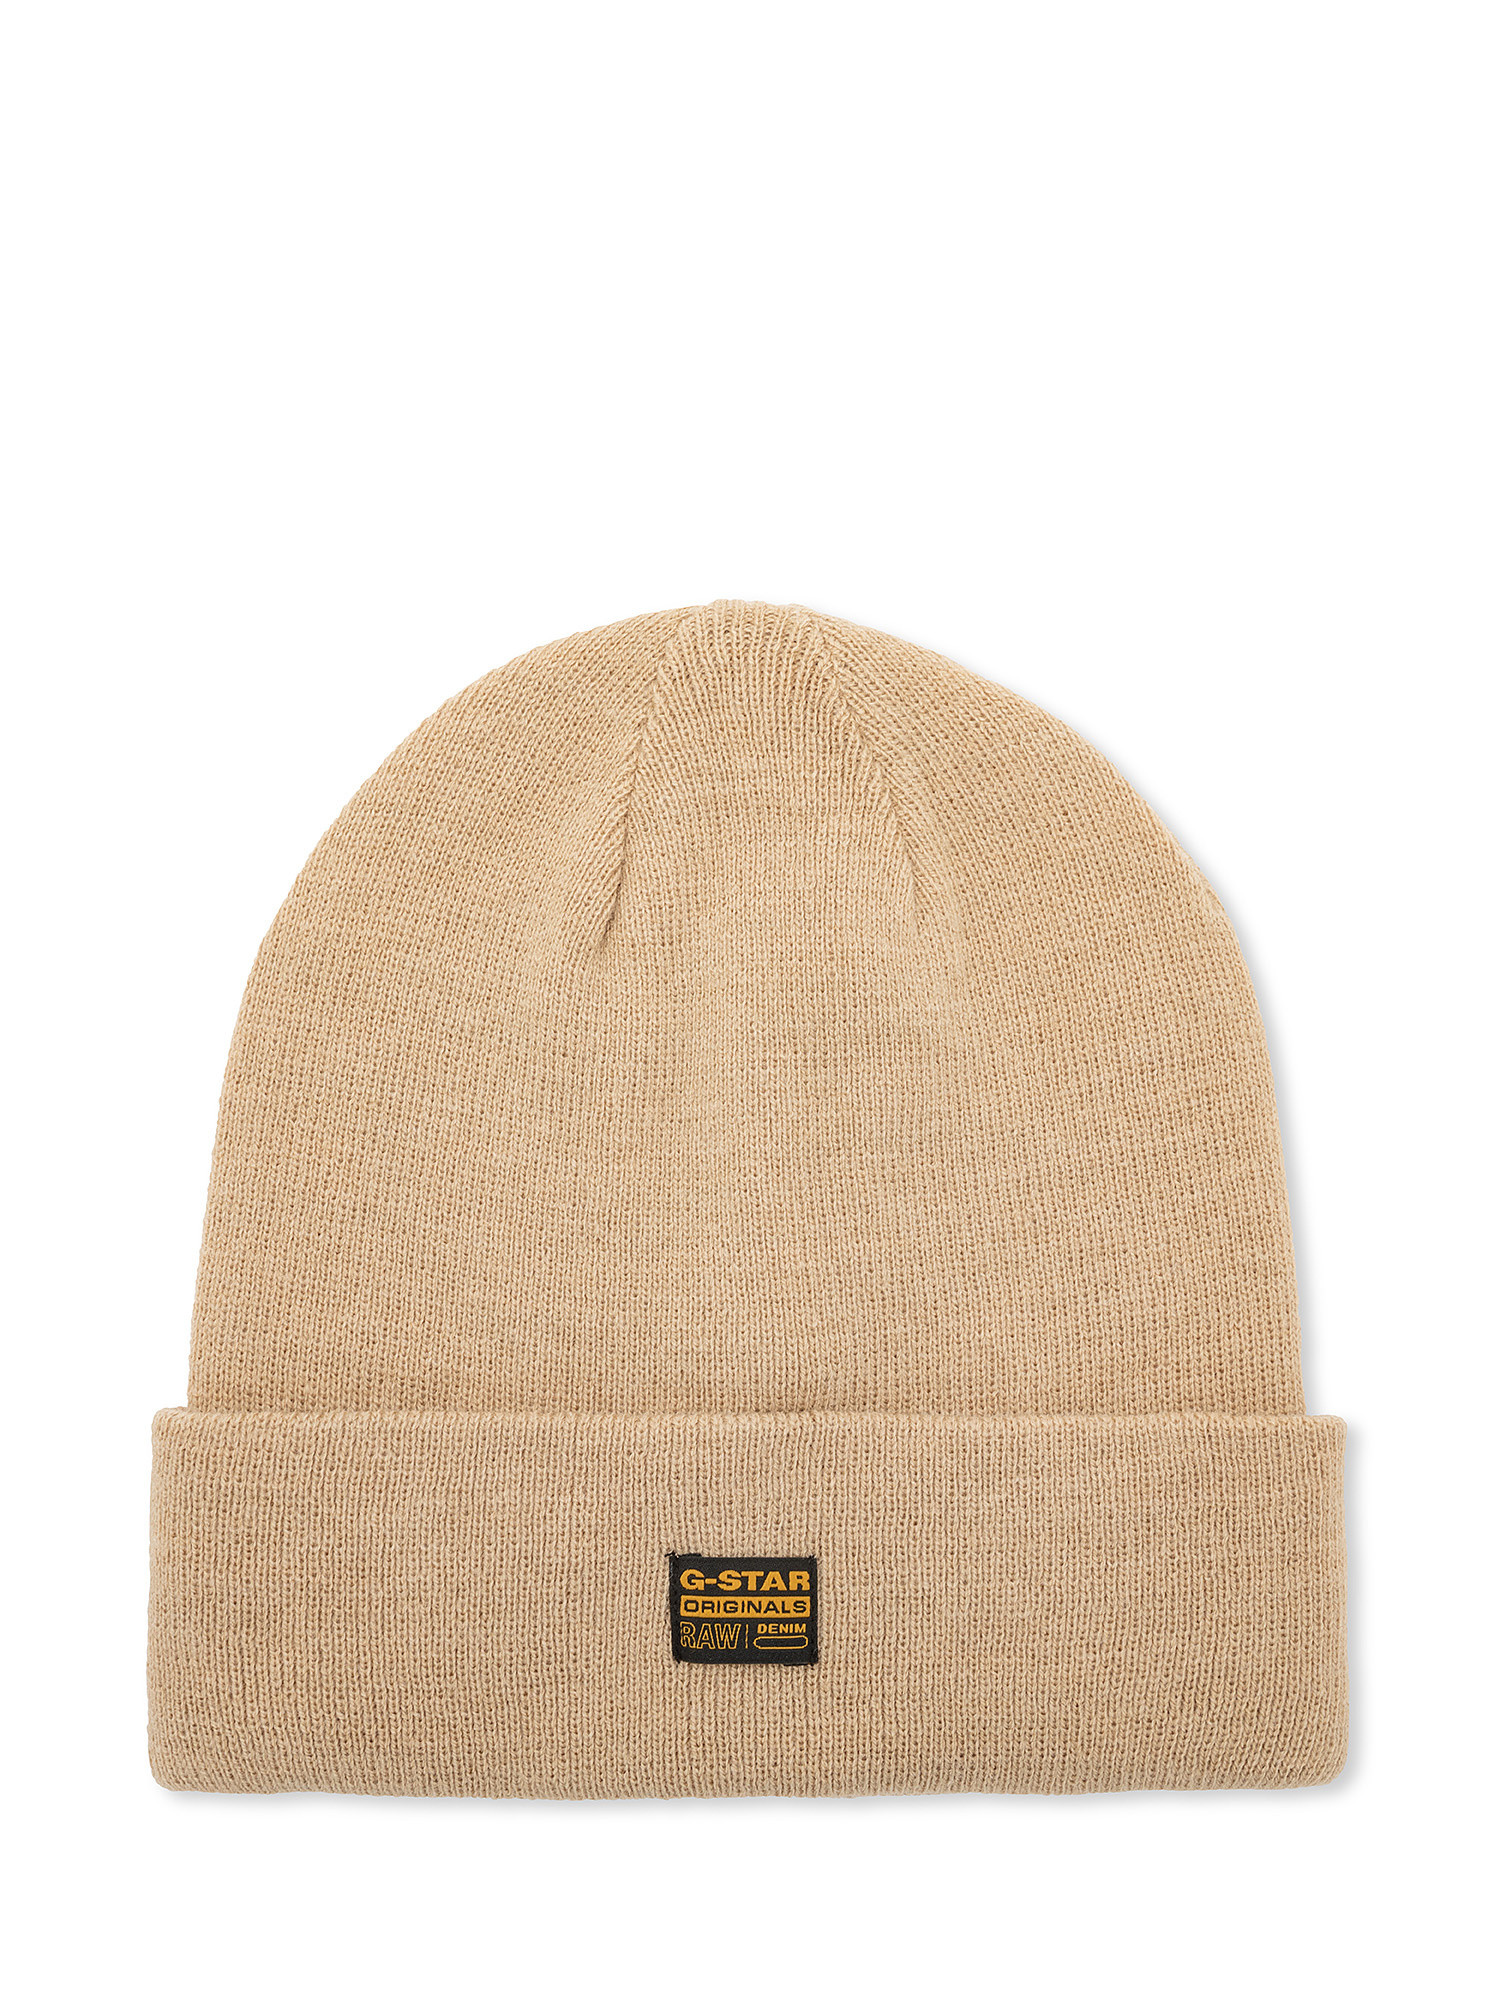 G-Star - Cap with logo, Beige, large image number 0